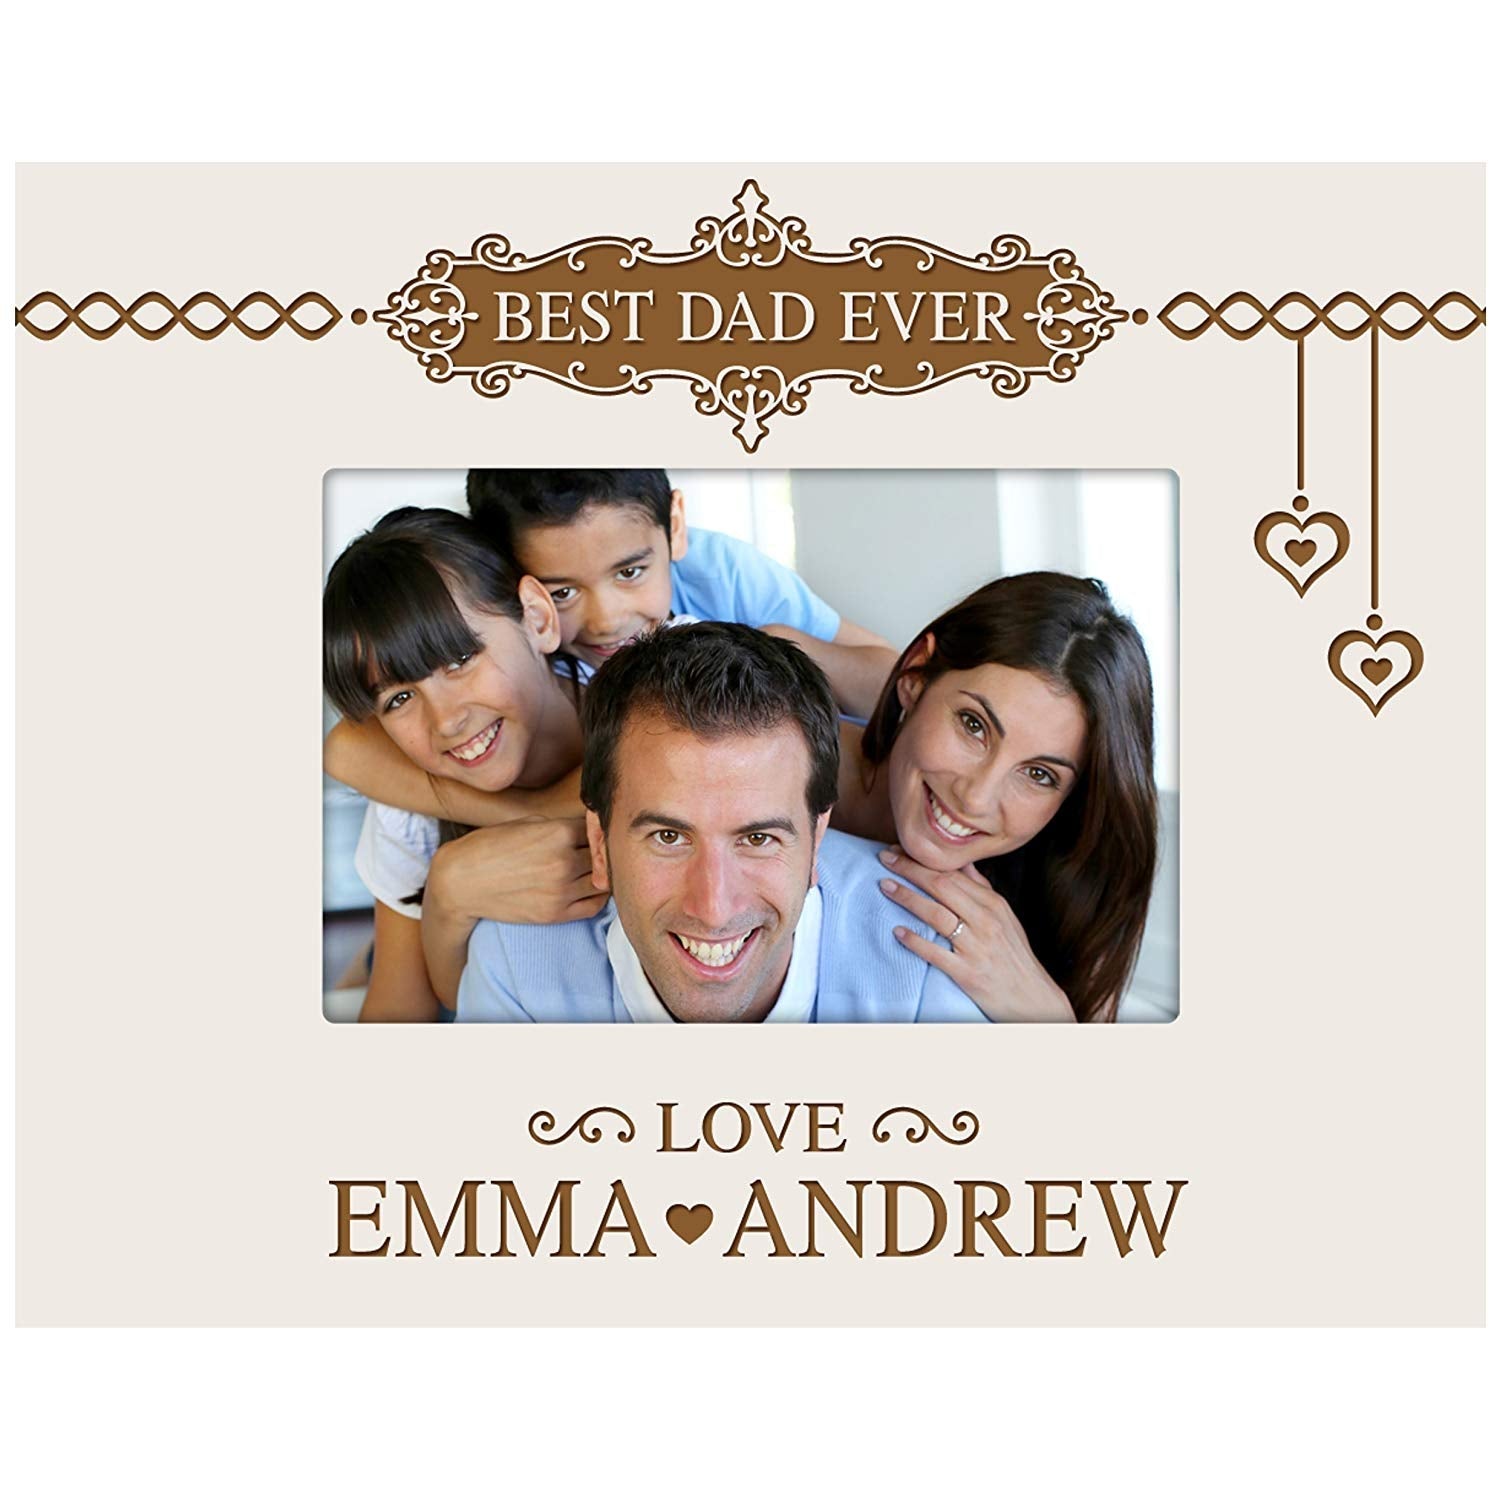 Personalized Father Birthday Photo Frame Gift - Best Dad Ever - LifeSong Milestones